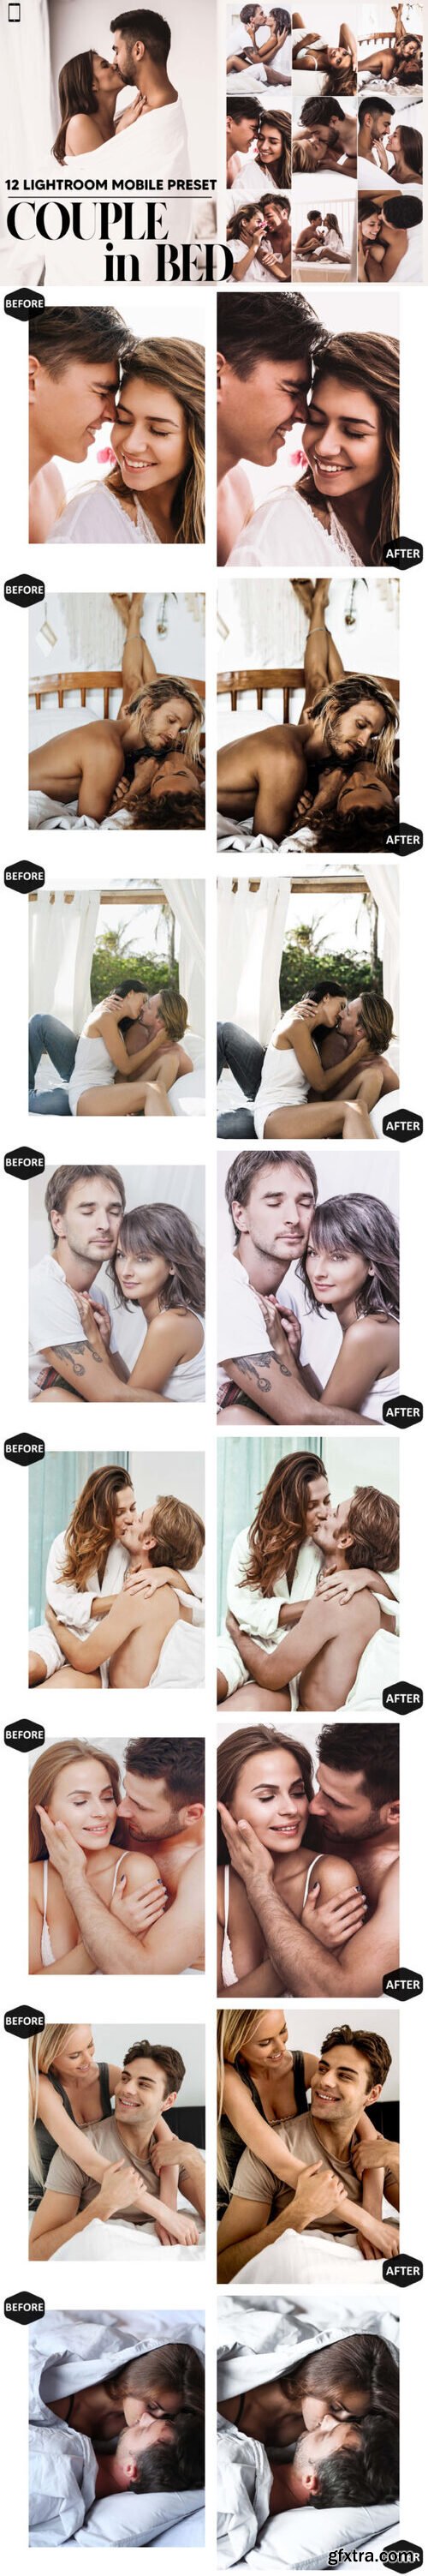 12 Couple in Bed Mobile LR Presets